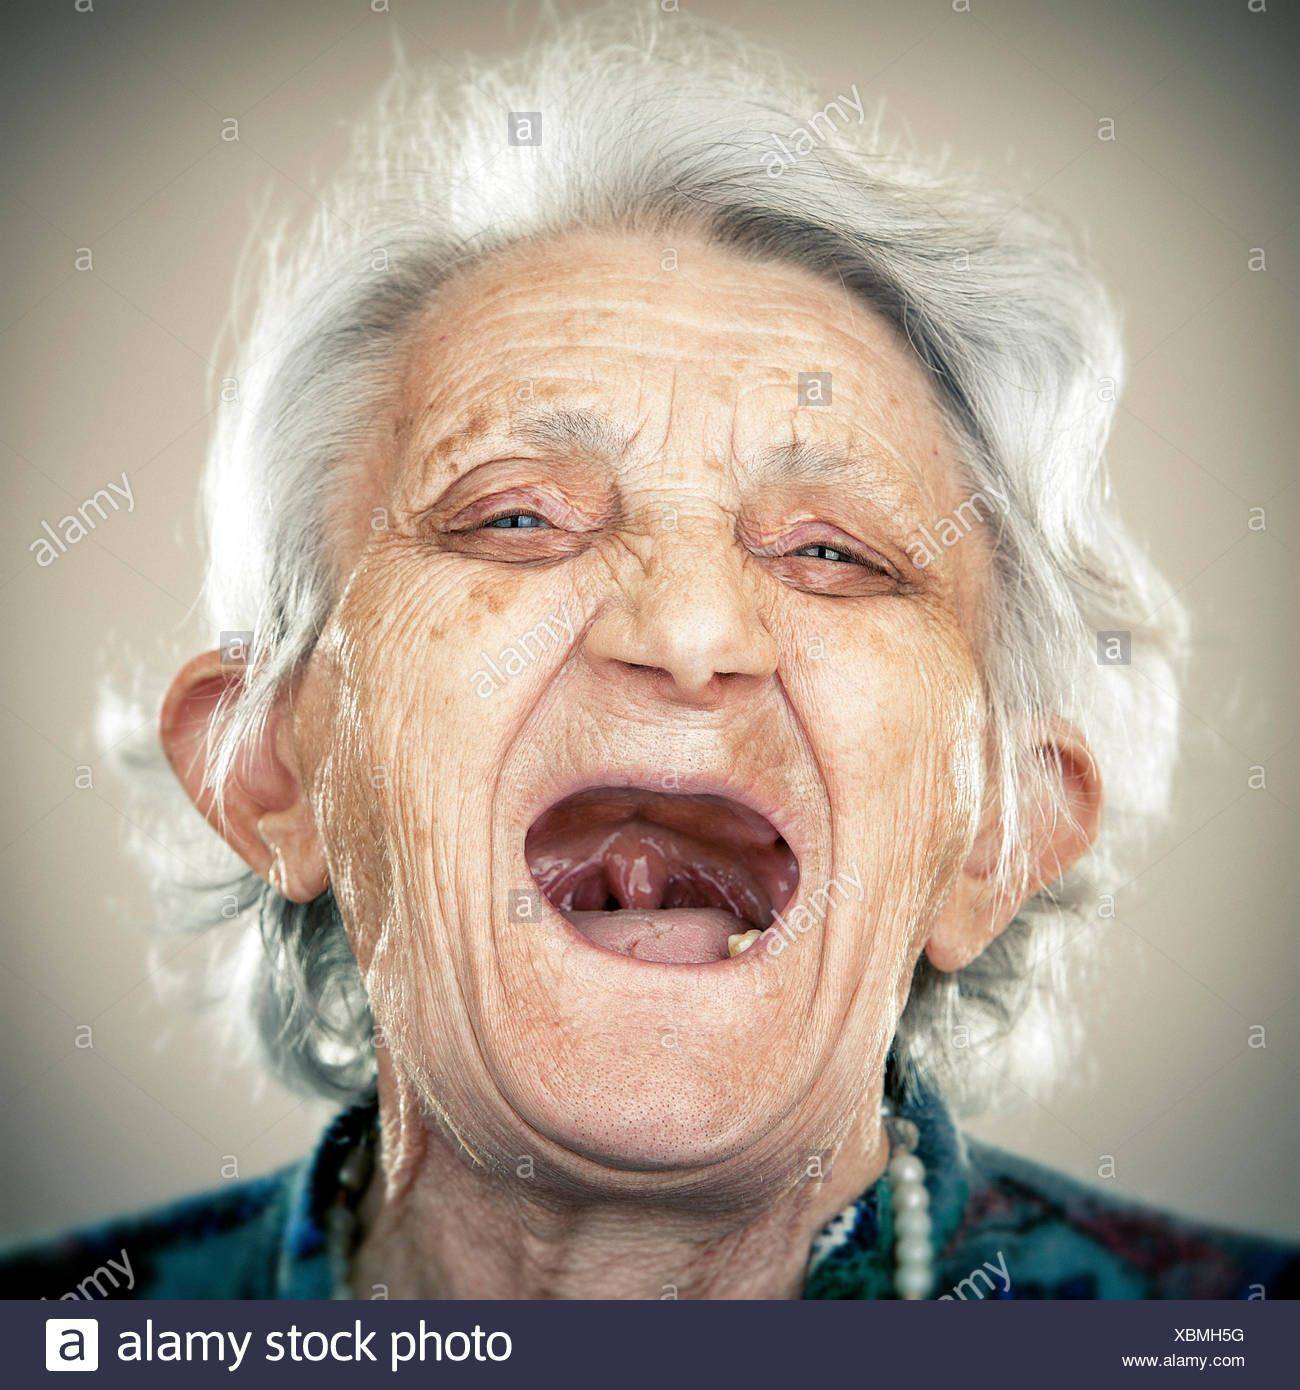 rtrait-of-an-elderly-lady-laughing-out-loud-XBMH5G.jpg